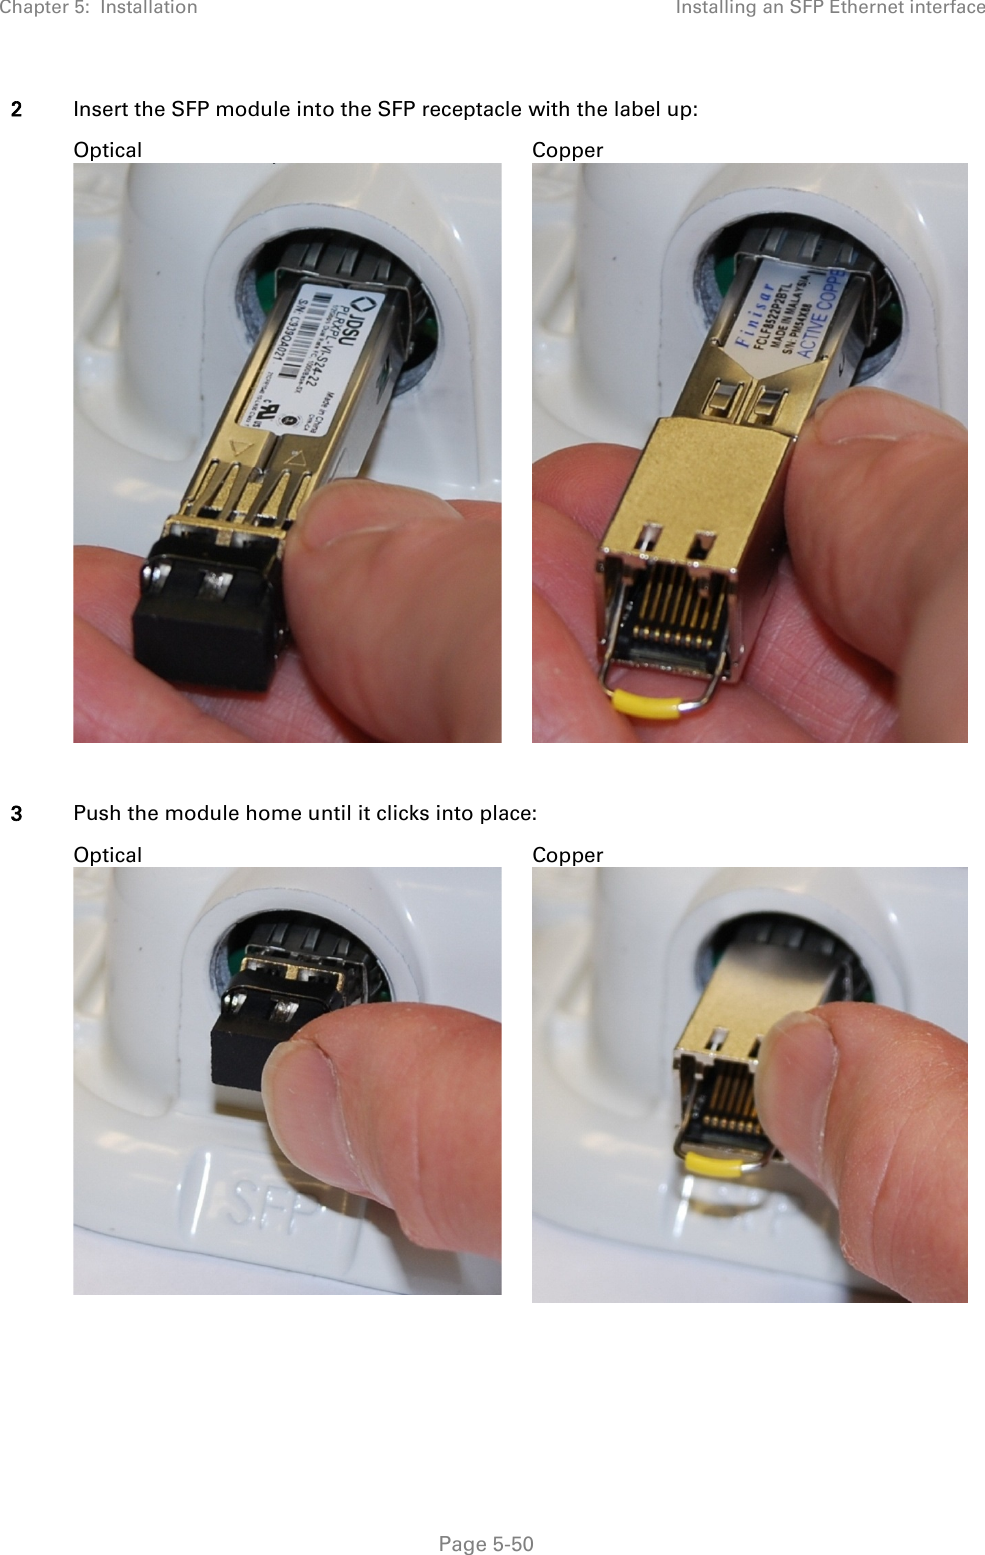 Chapter 5:  Installation Installing an SFP Ethernet interface  2 Insert the SFP module into the SFP receptacle with the label up:   Optical  Copper   3 Push the module home until it clicks into place:  Optical  Copper       Page 5-50 